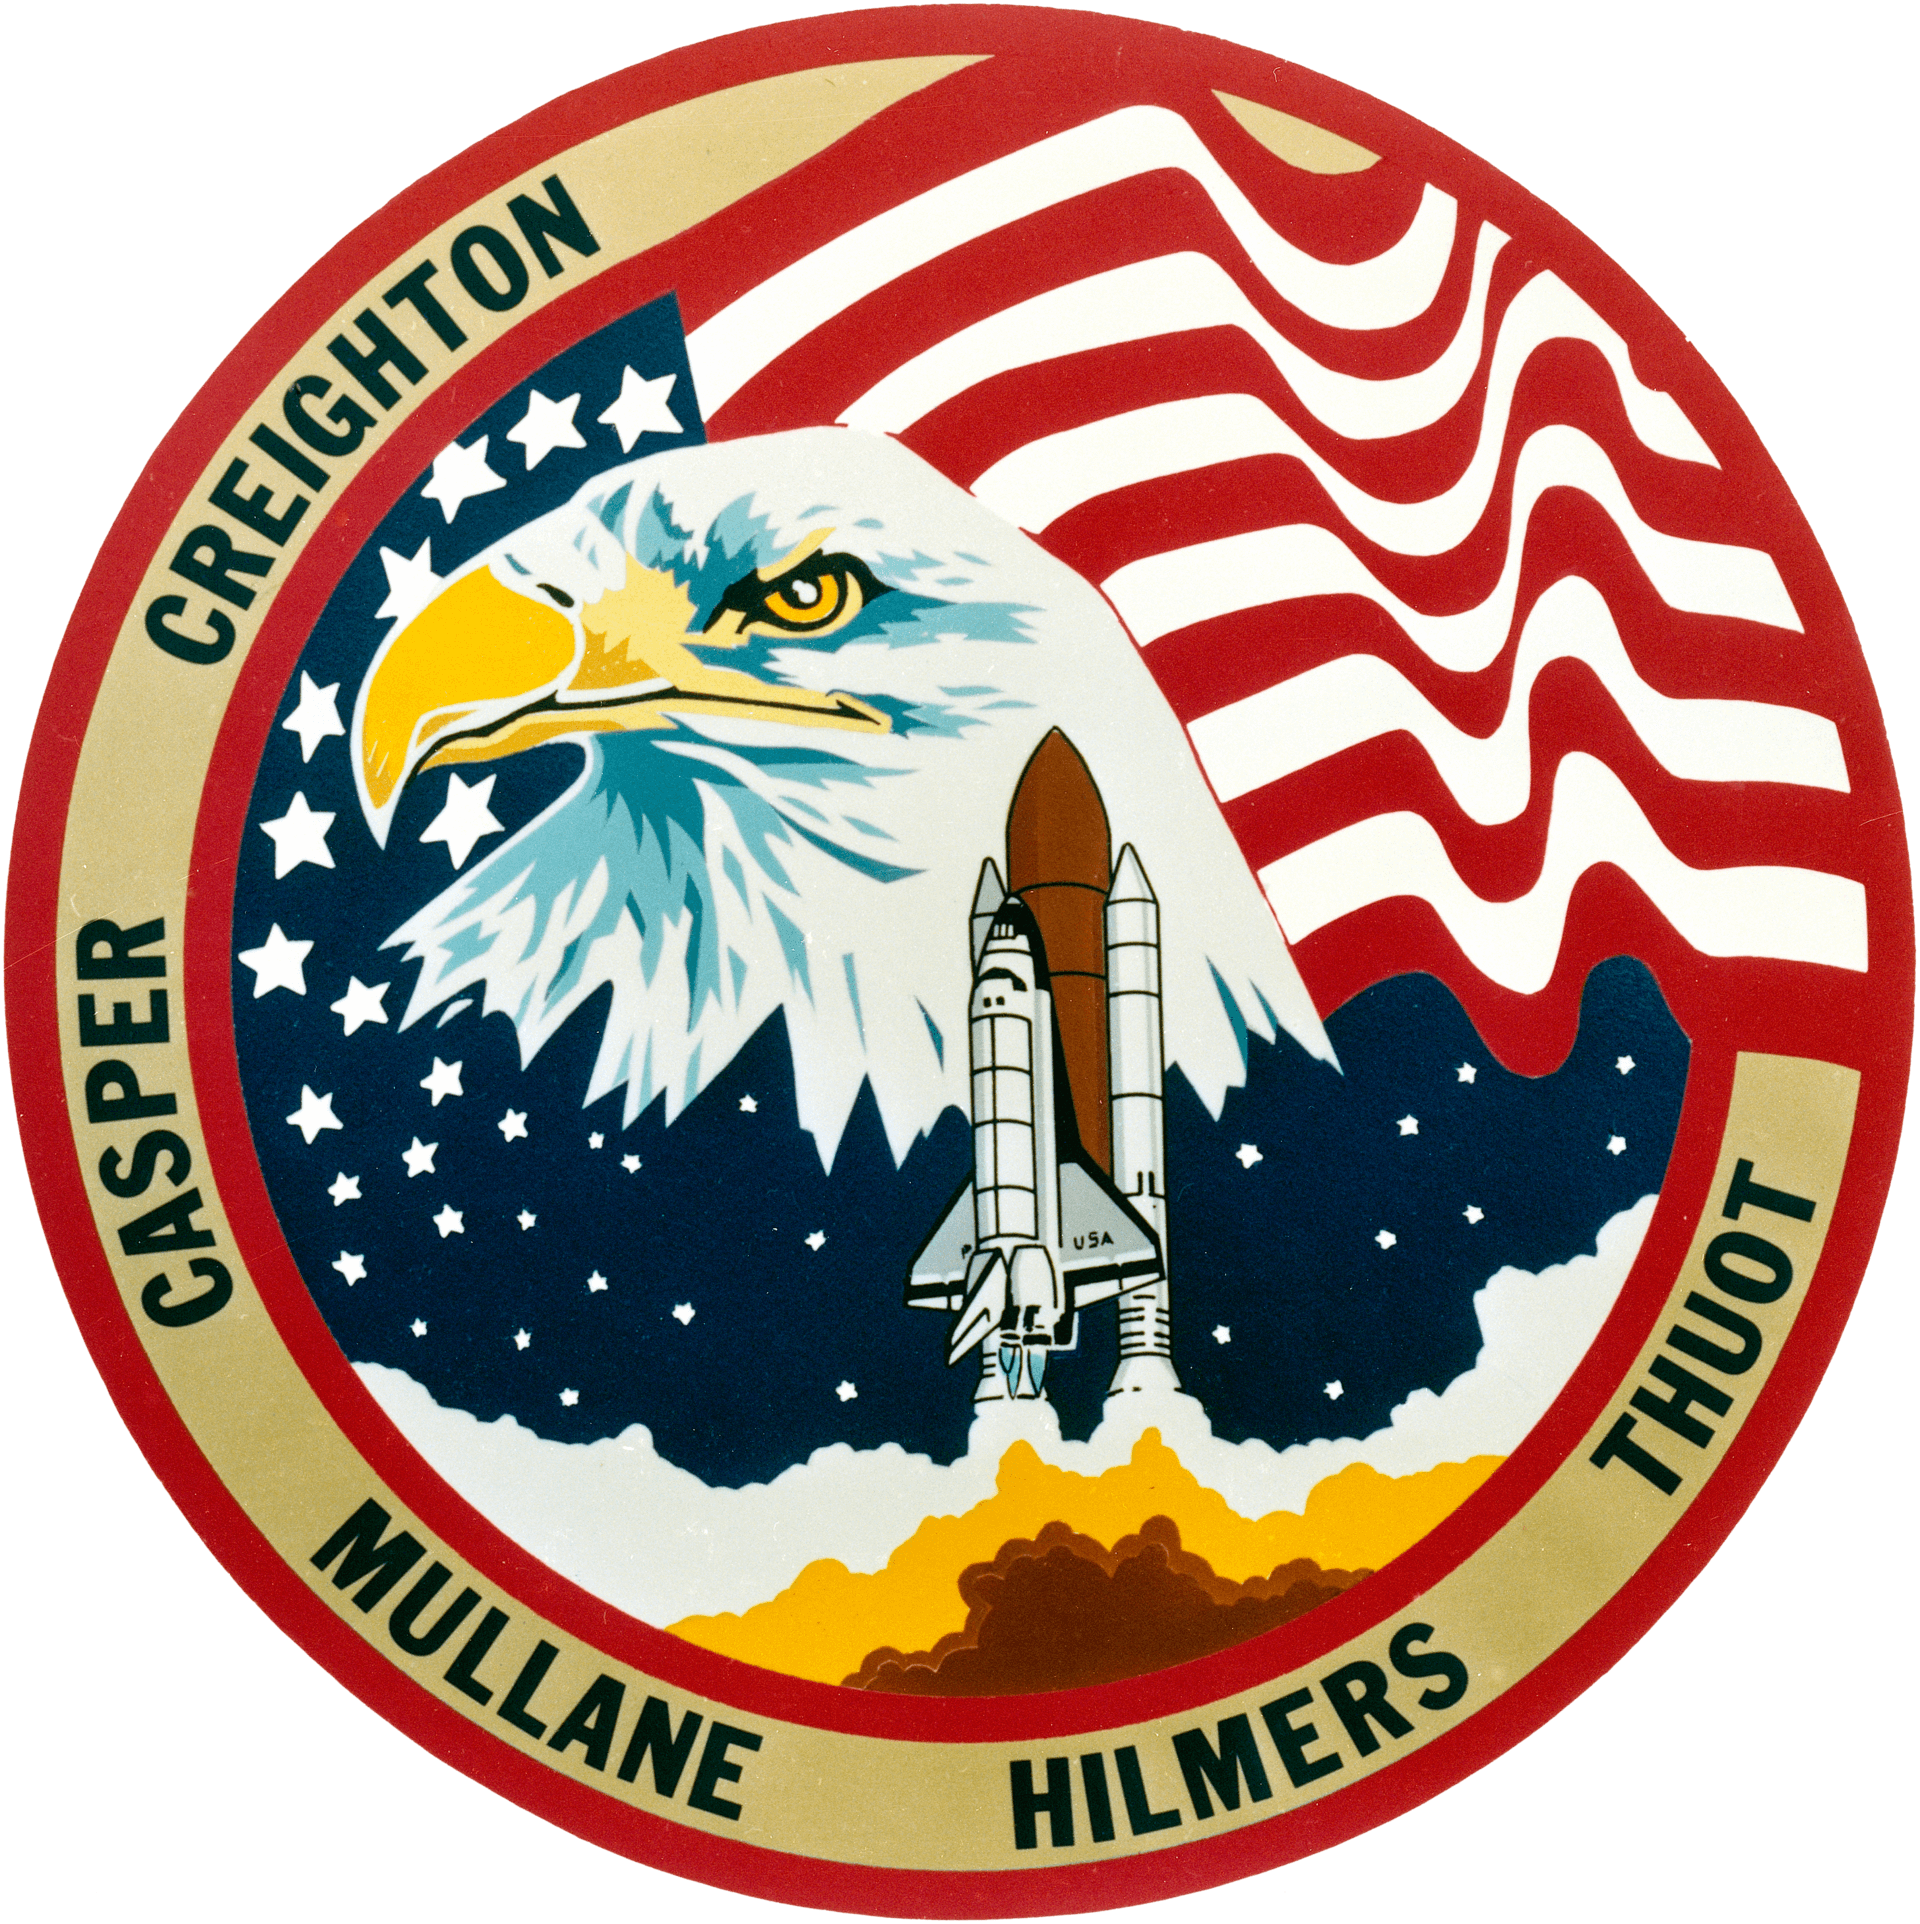 STS-36 Patch